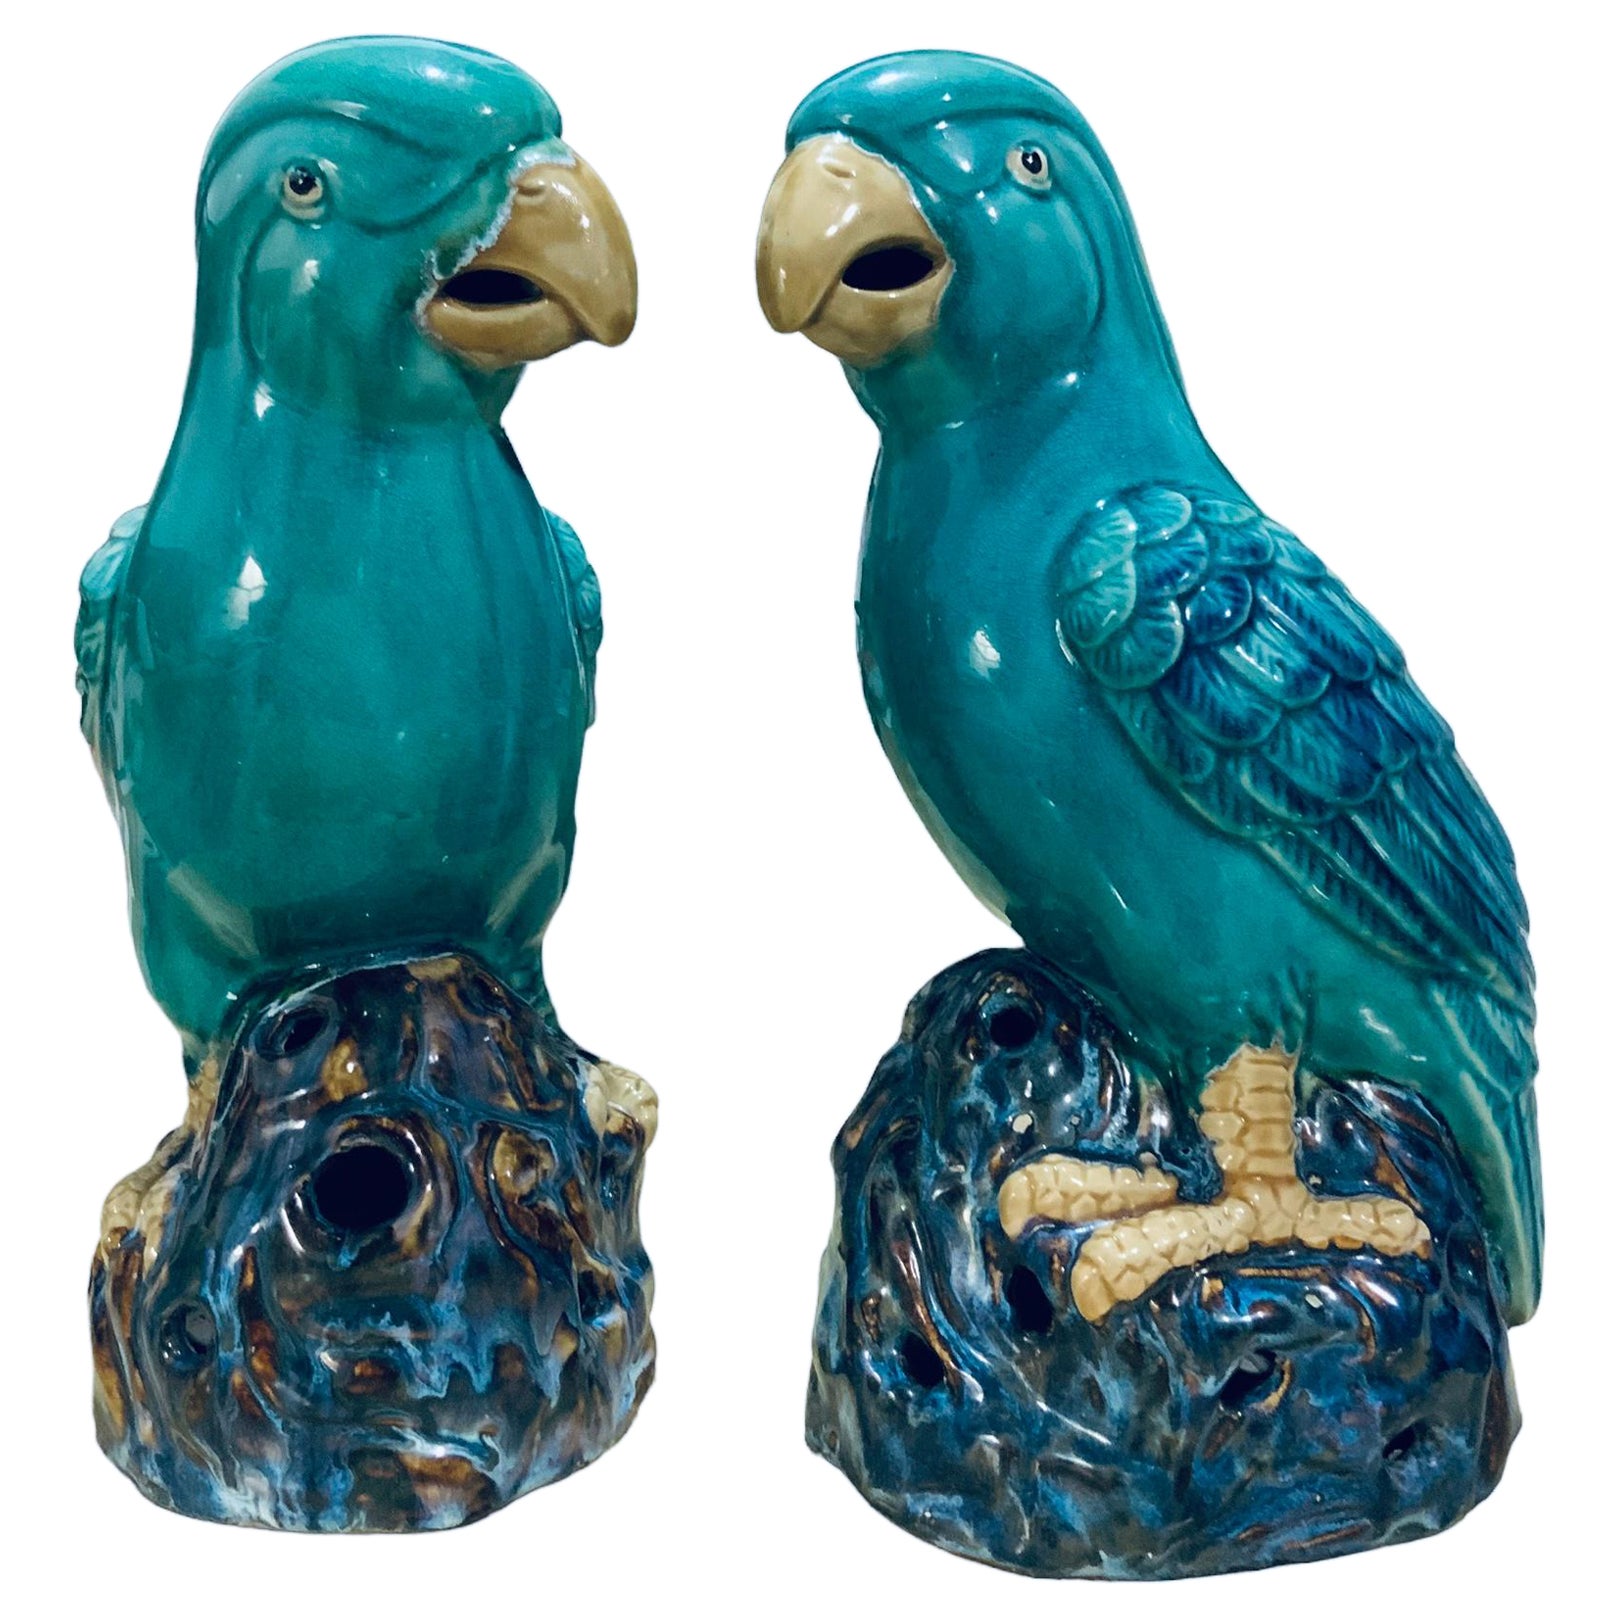 Pair Of Hand Painted Chinese Ceramic Parrots